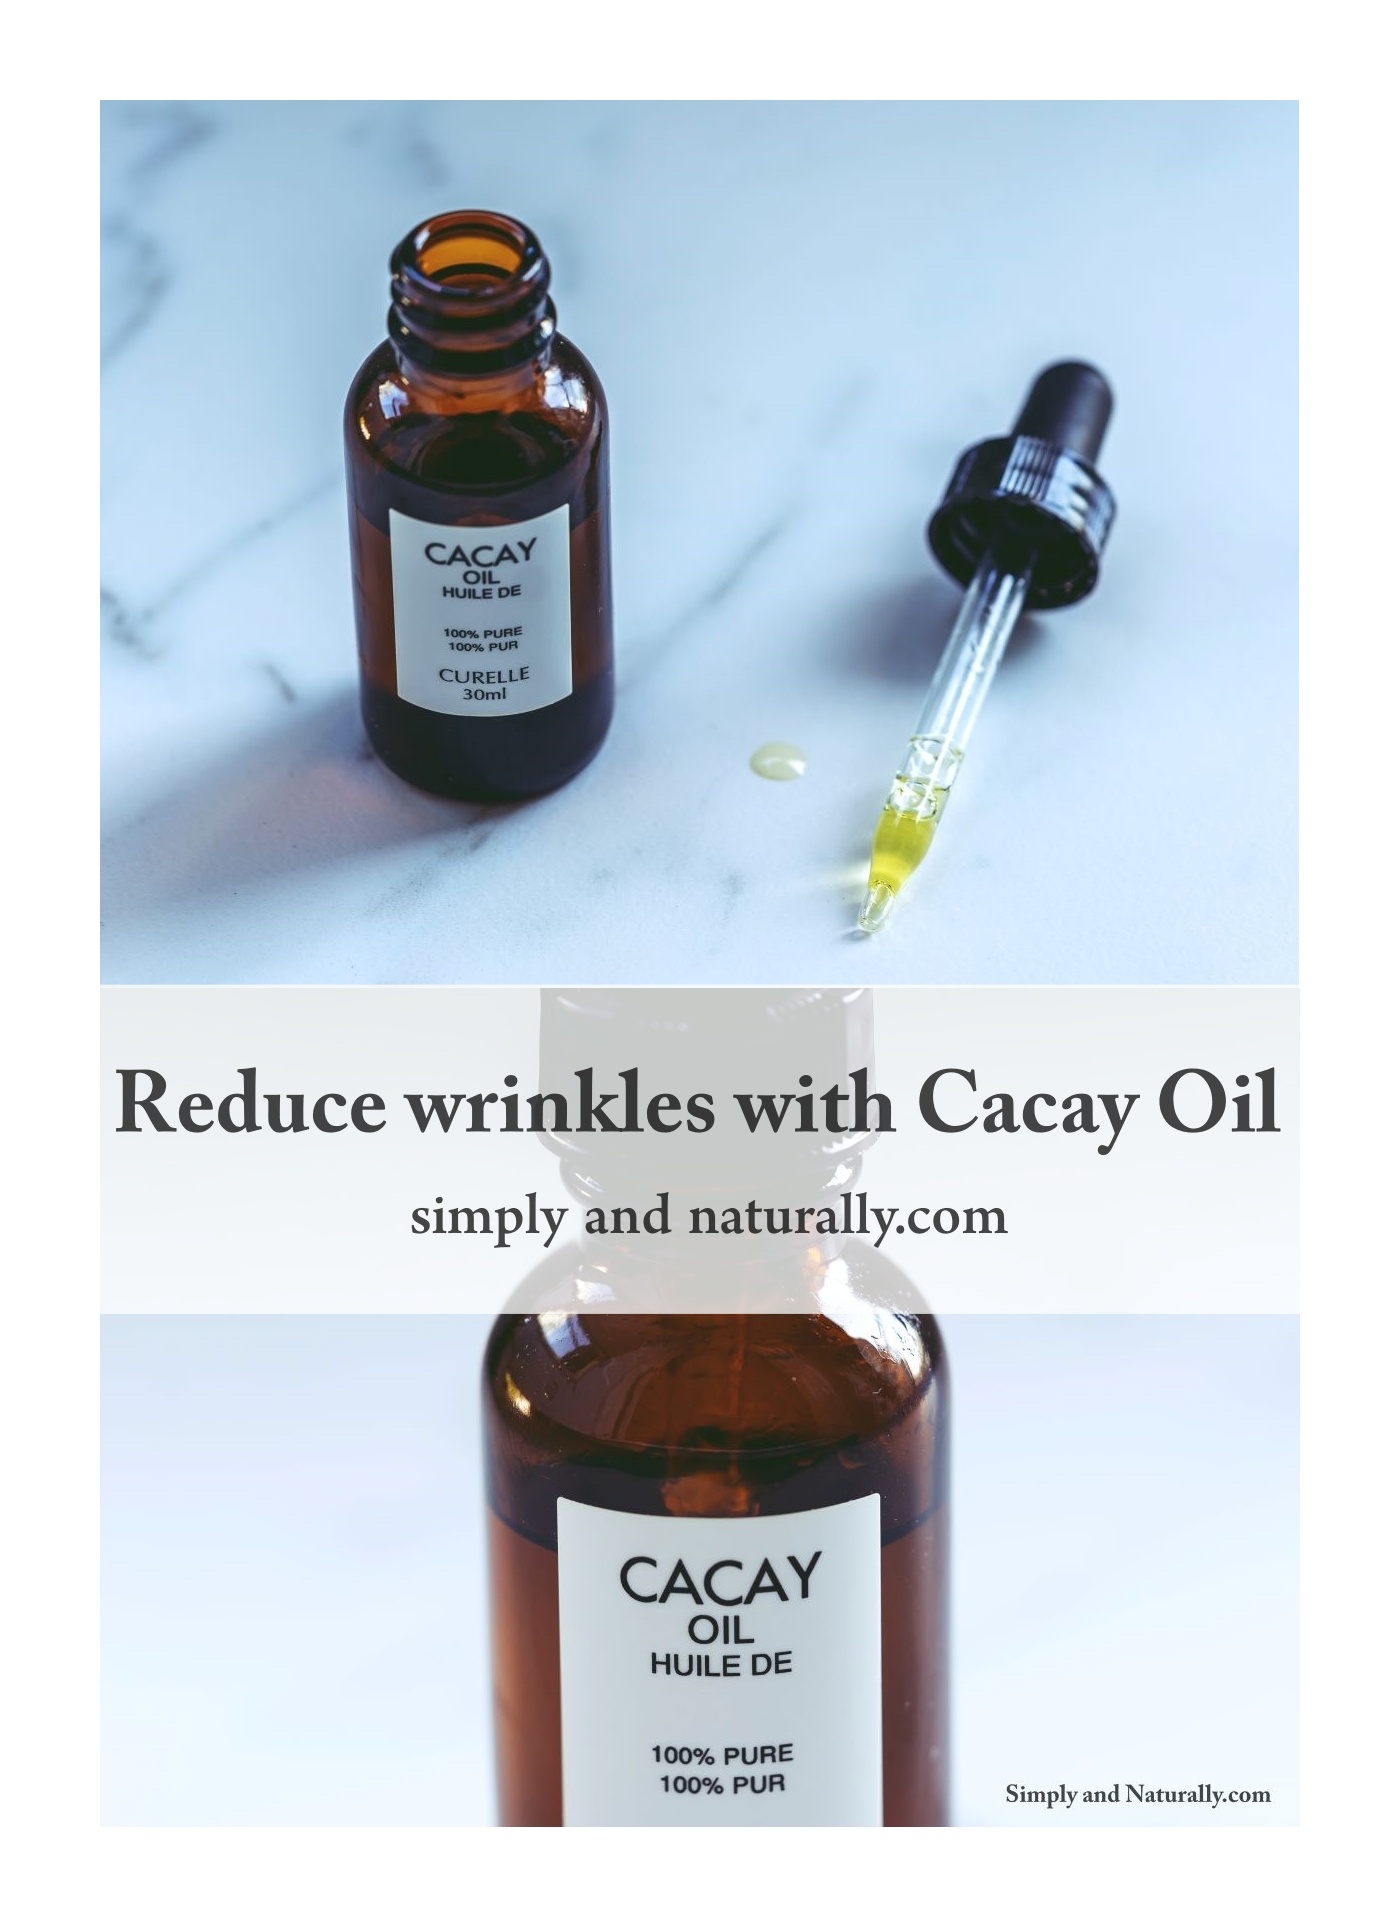 Reduce wrinkles with Cacay Oil